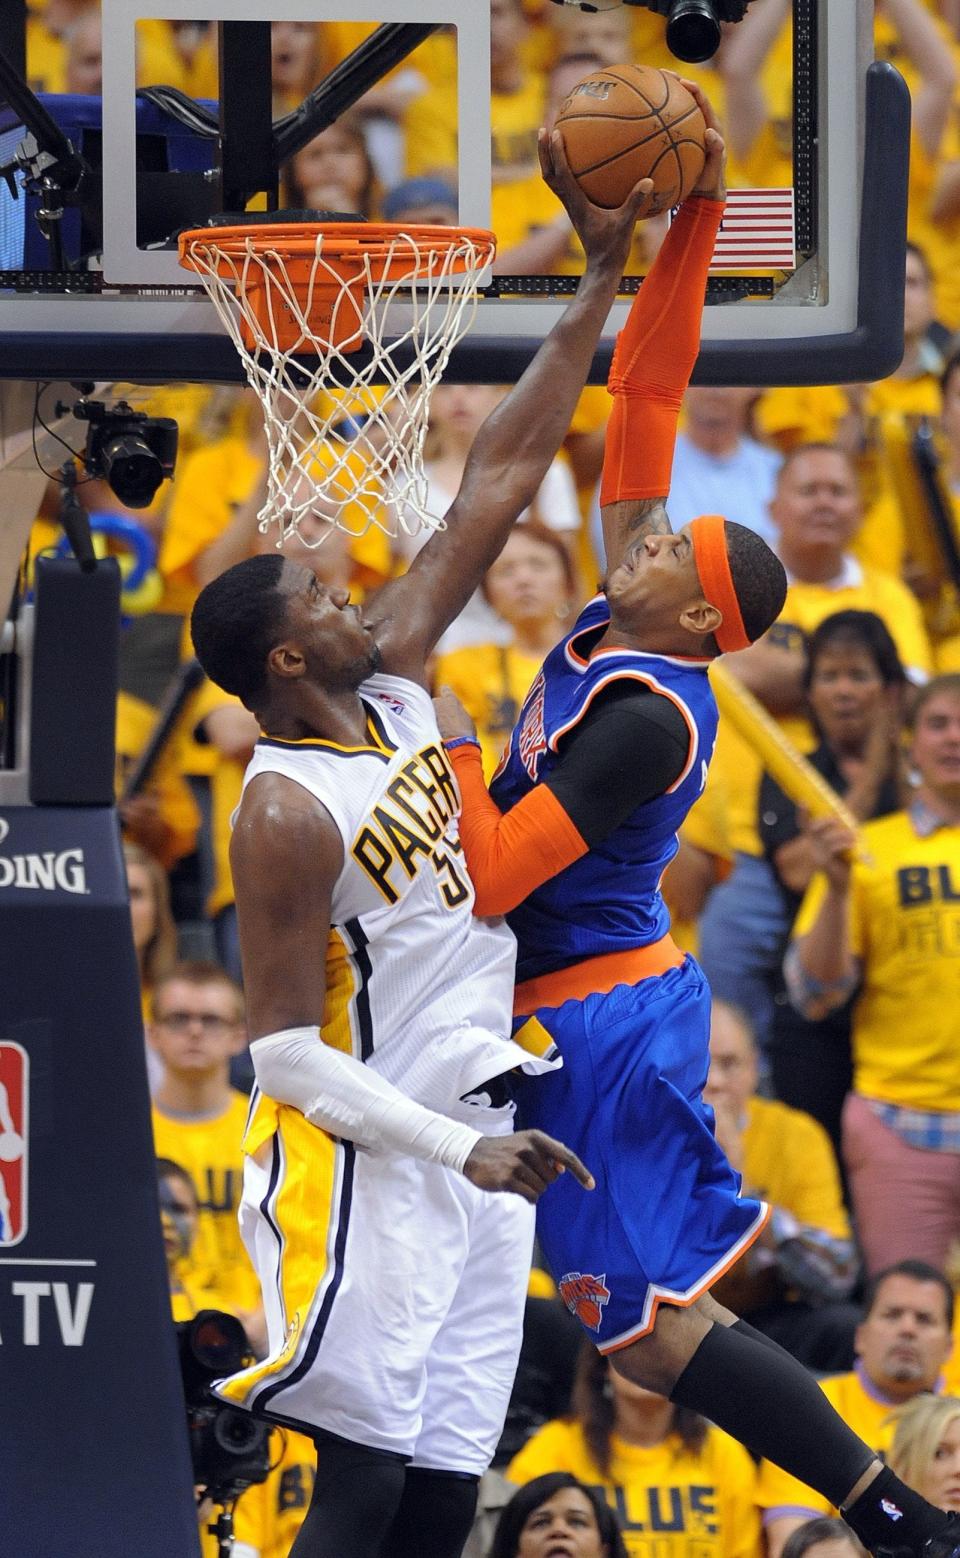 Roy Hibbert (All-Star in 2011-12, 13-14) blocks a dunk attempt by Carmelo Anthony of the Knicks in Game 6 of the Eastern Conference semifinals on May 18, 2013.